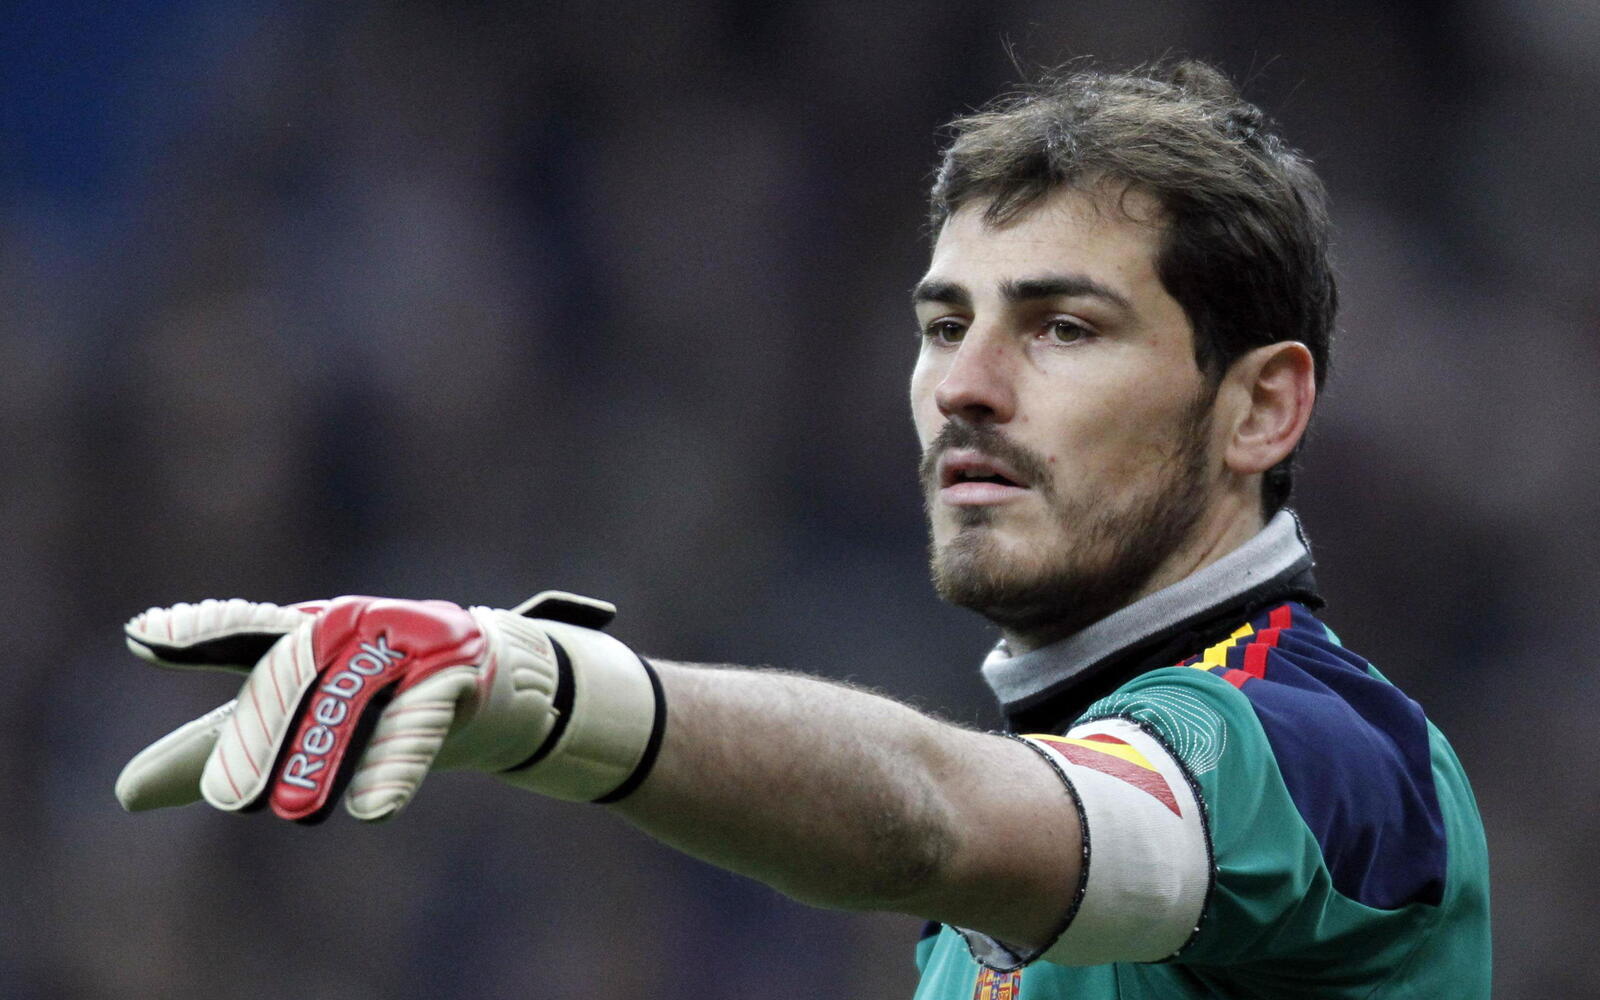 Wallpapers team of spain real madrid icer casillas on the desktop